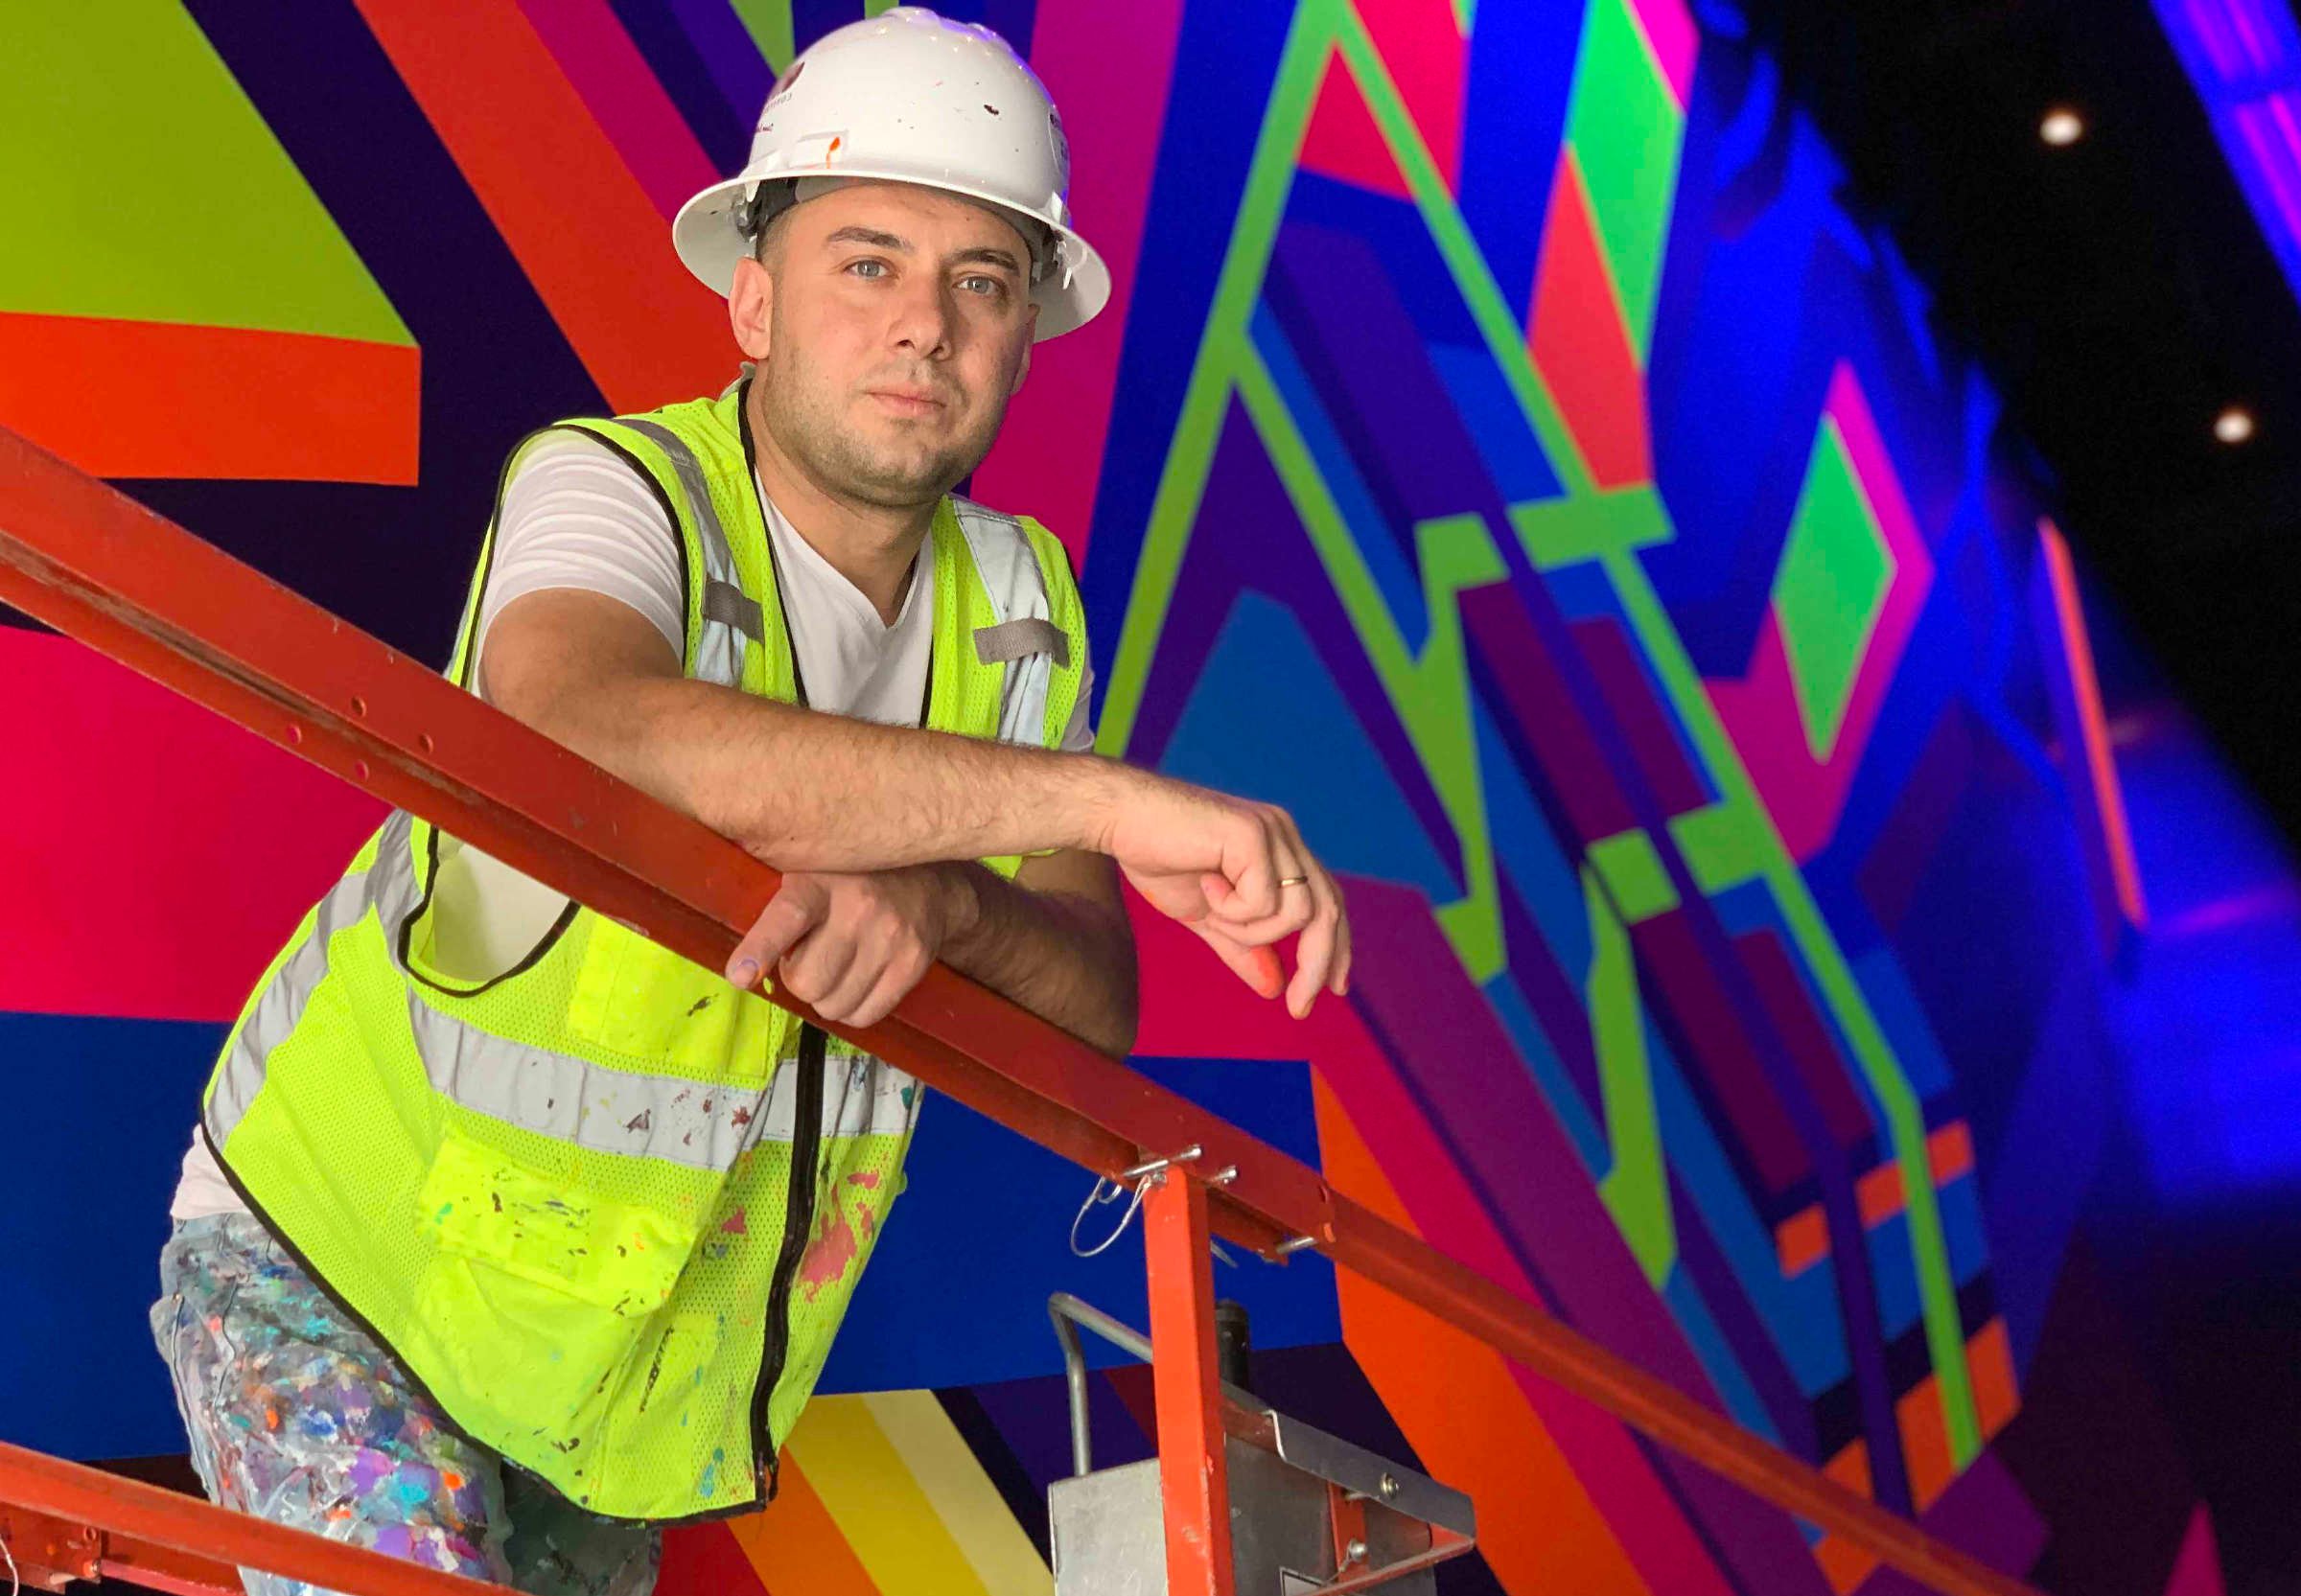 The artist poses in front of his colorful and geometric mural.